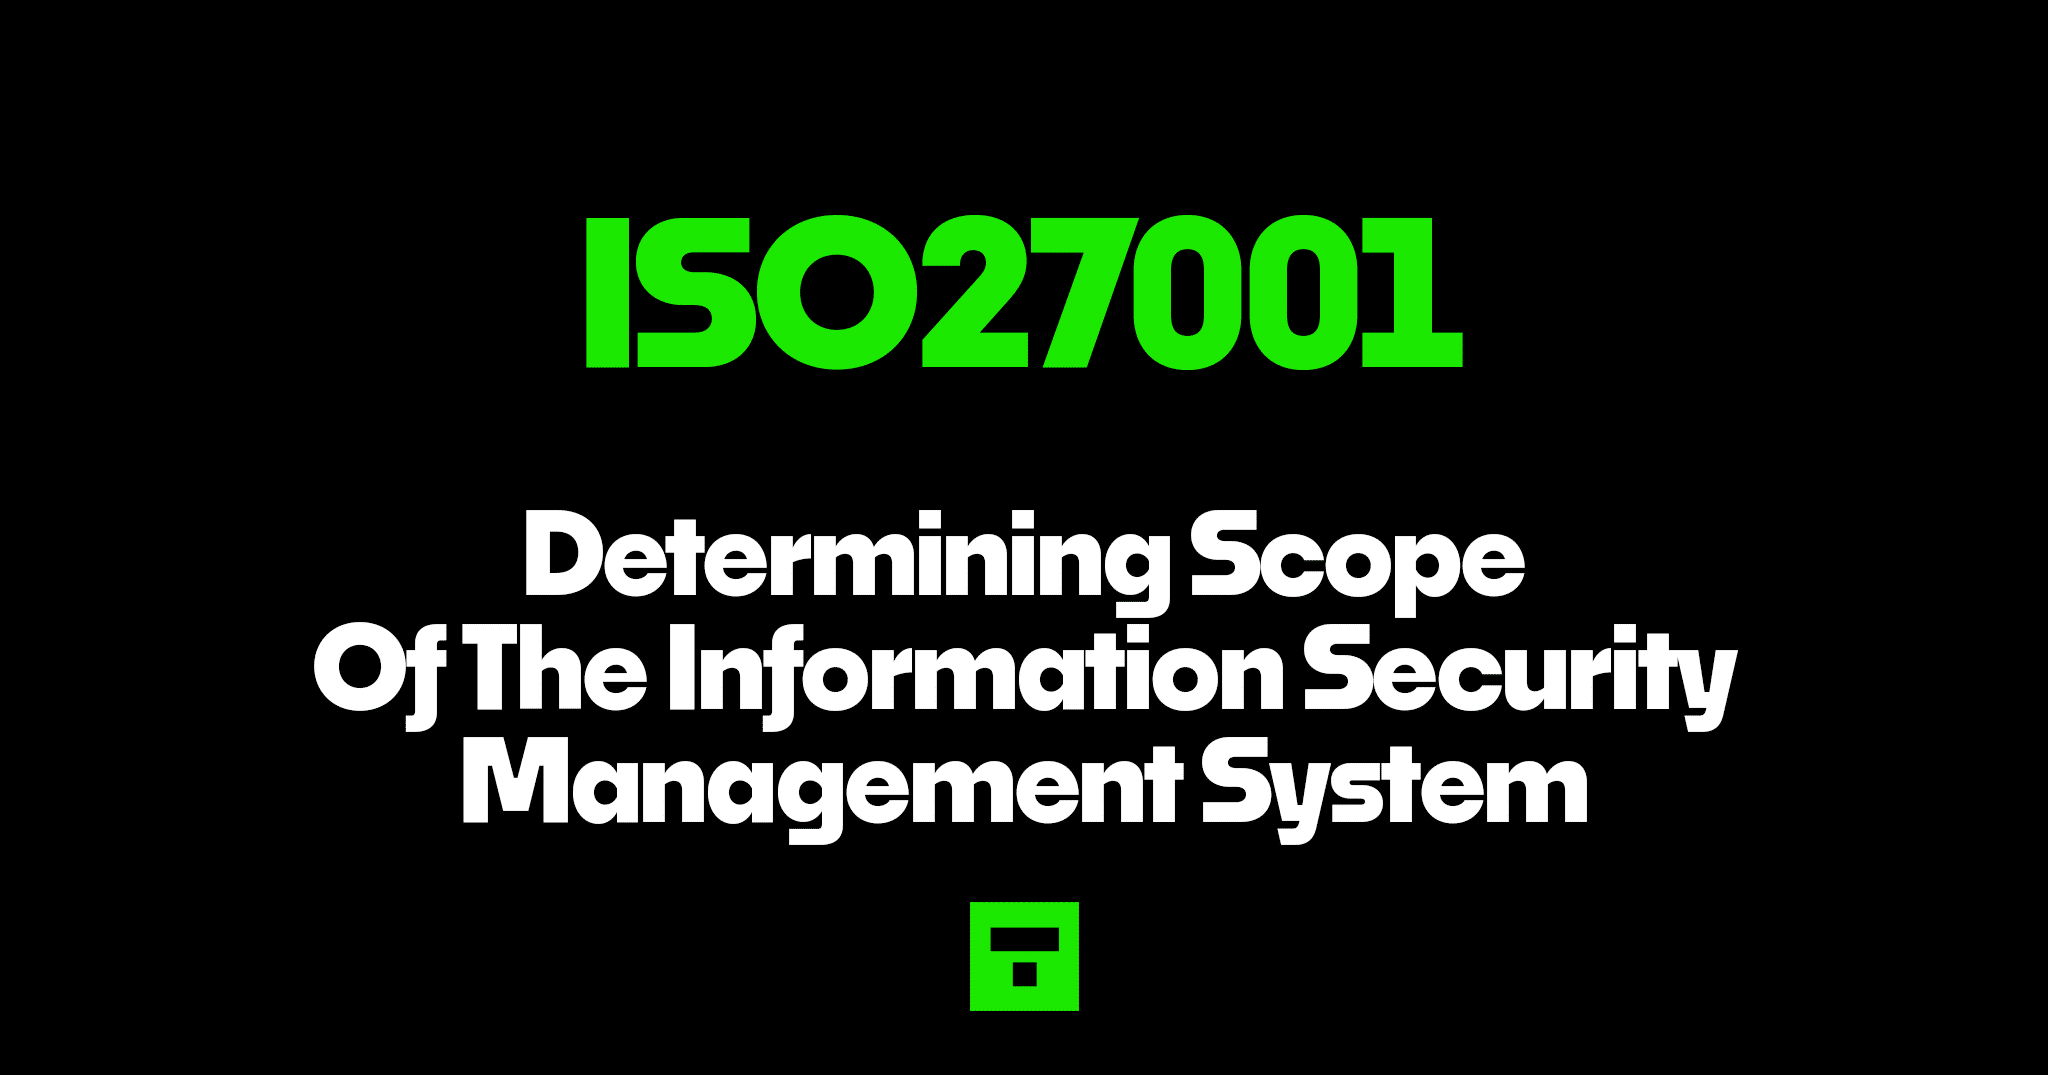 ISO27001 Determining Scope Of The Information Security Management System